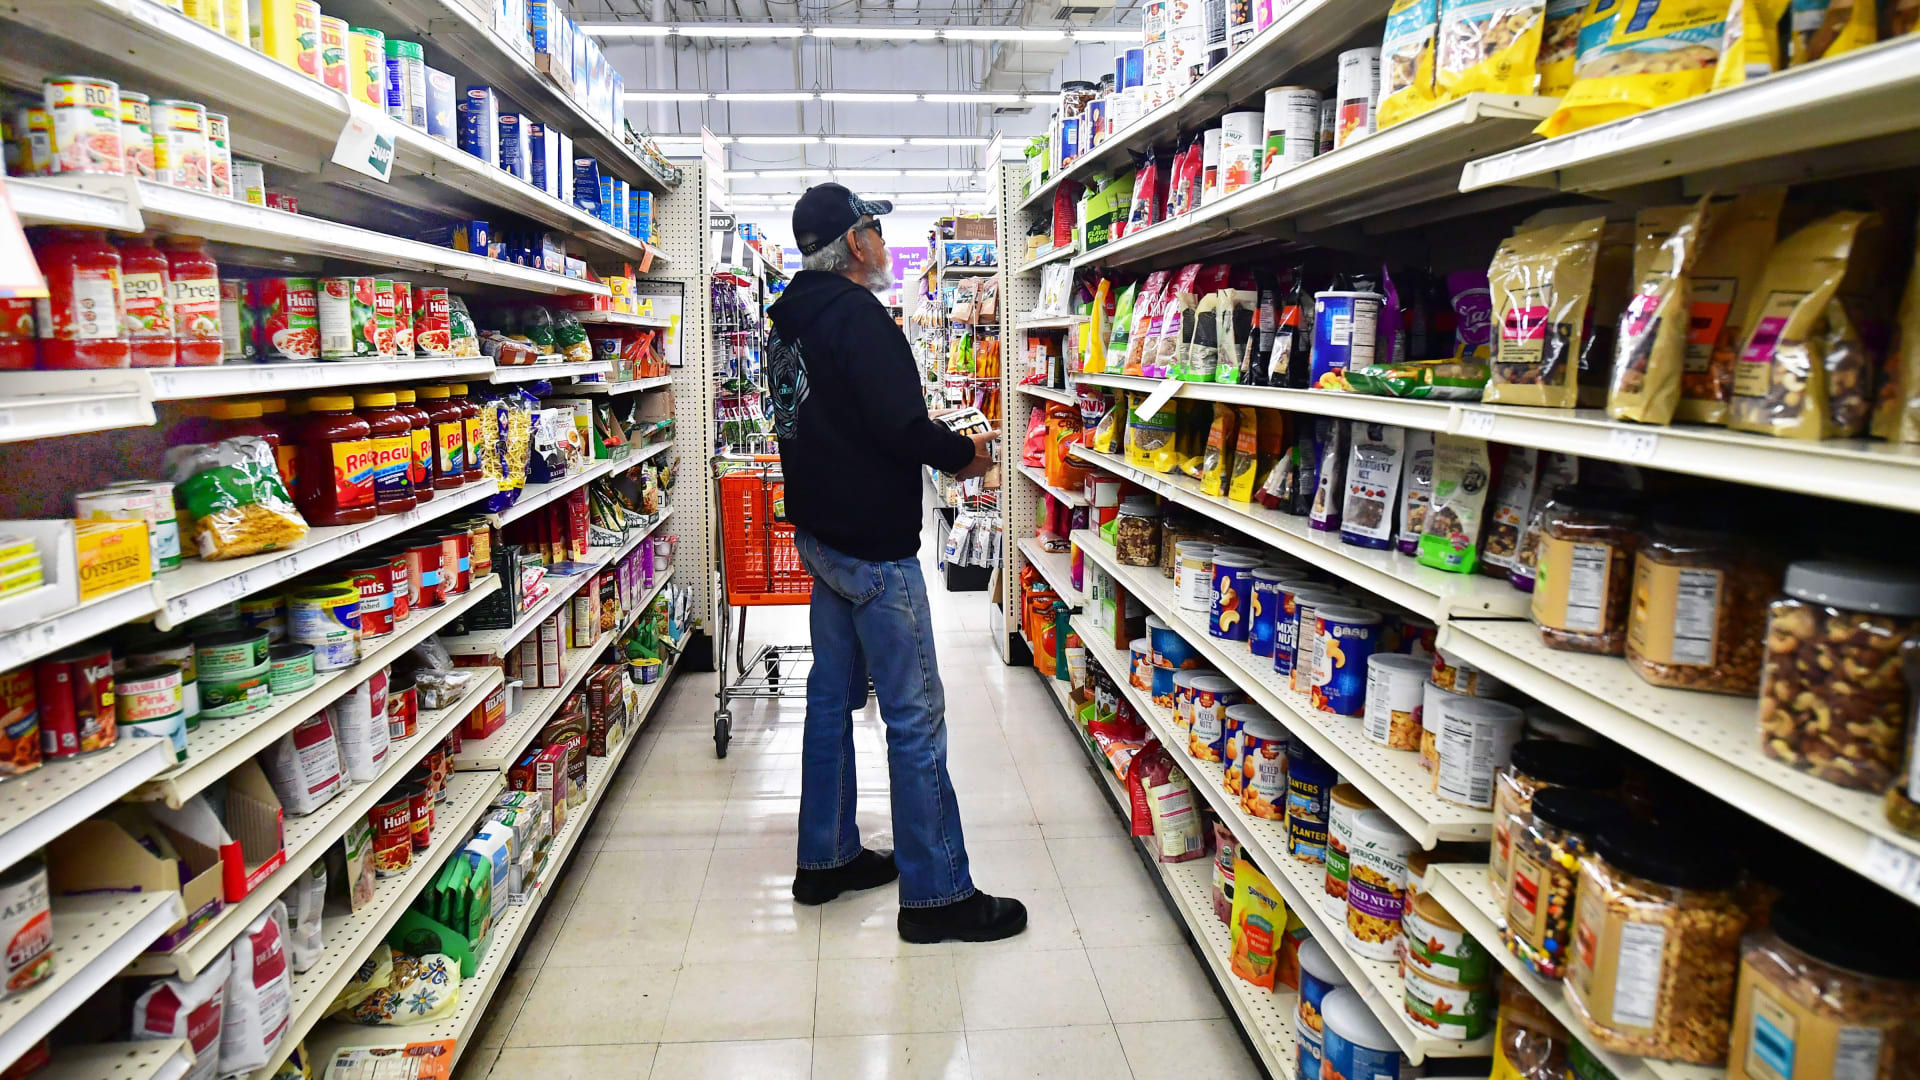 A shopper pauses in the aisle while shopping for food items in Alhambra, California